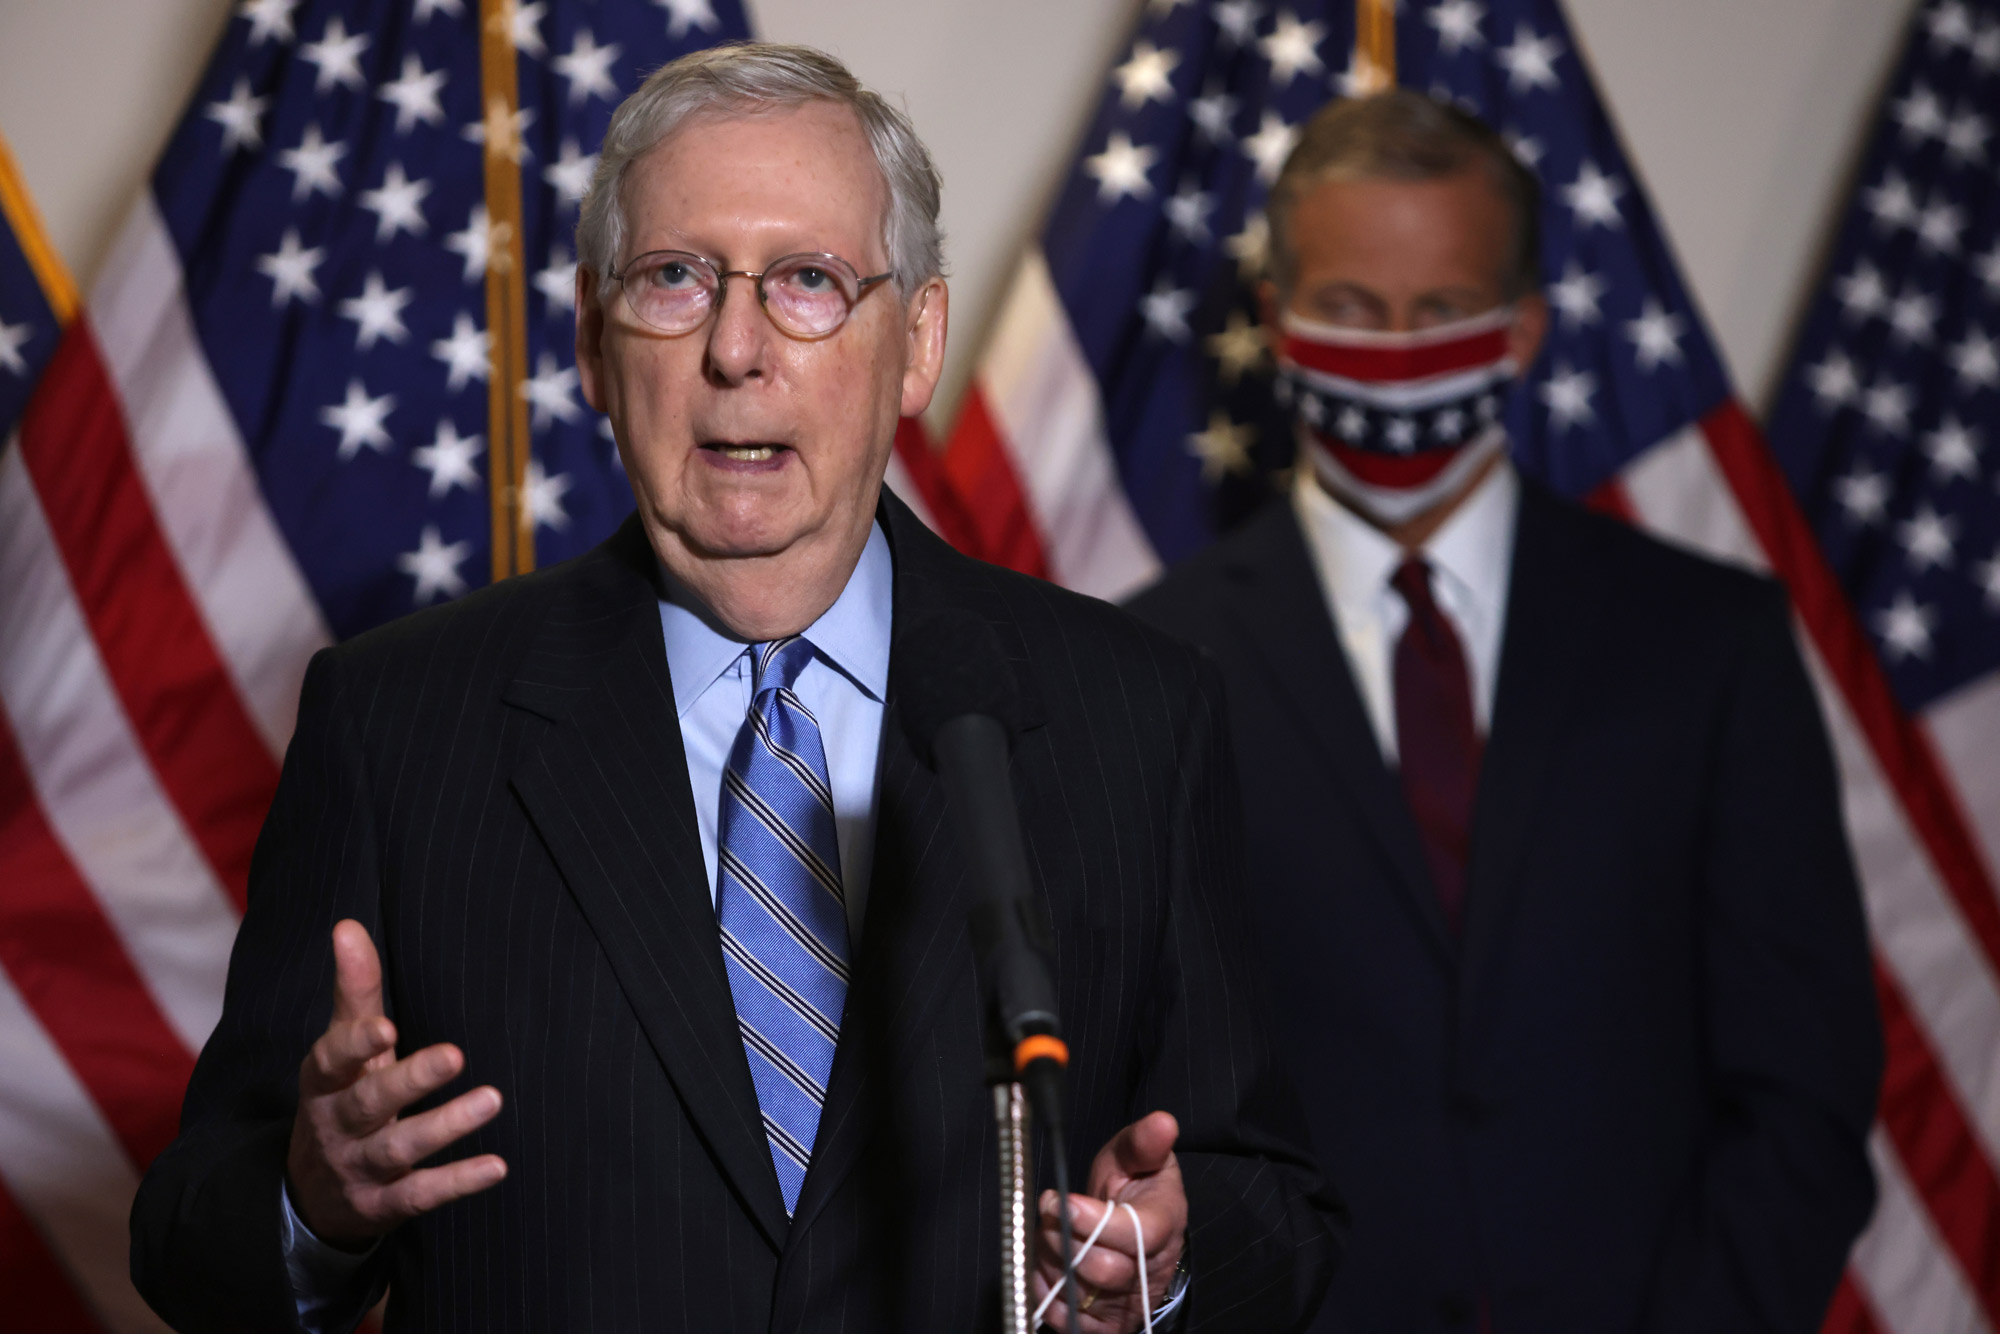 McConnell continues to blame Democrats over stalled stimulus negotiations